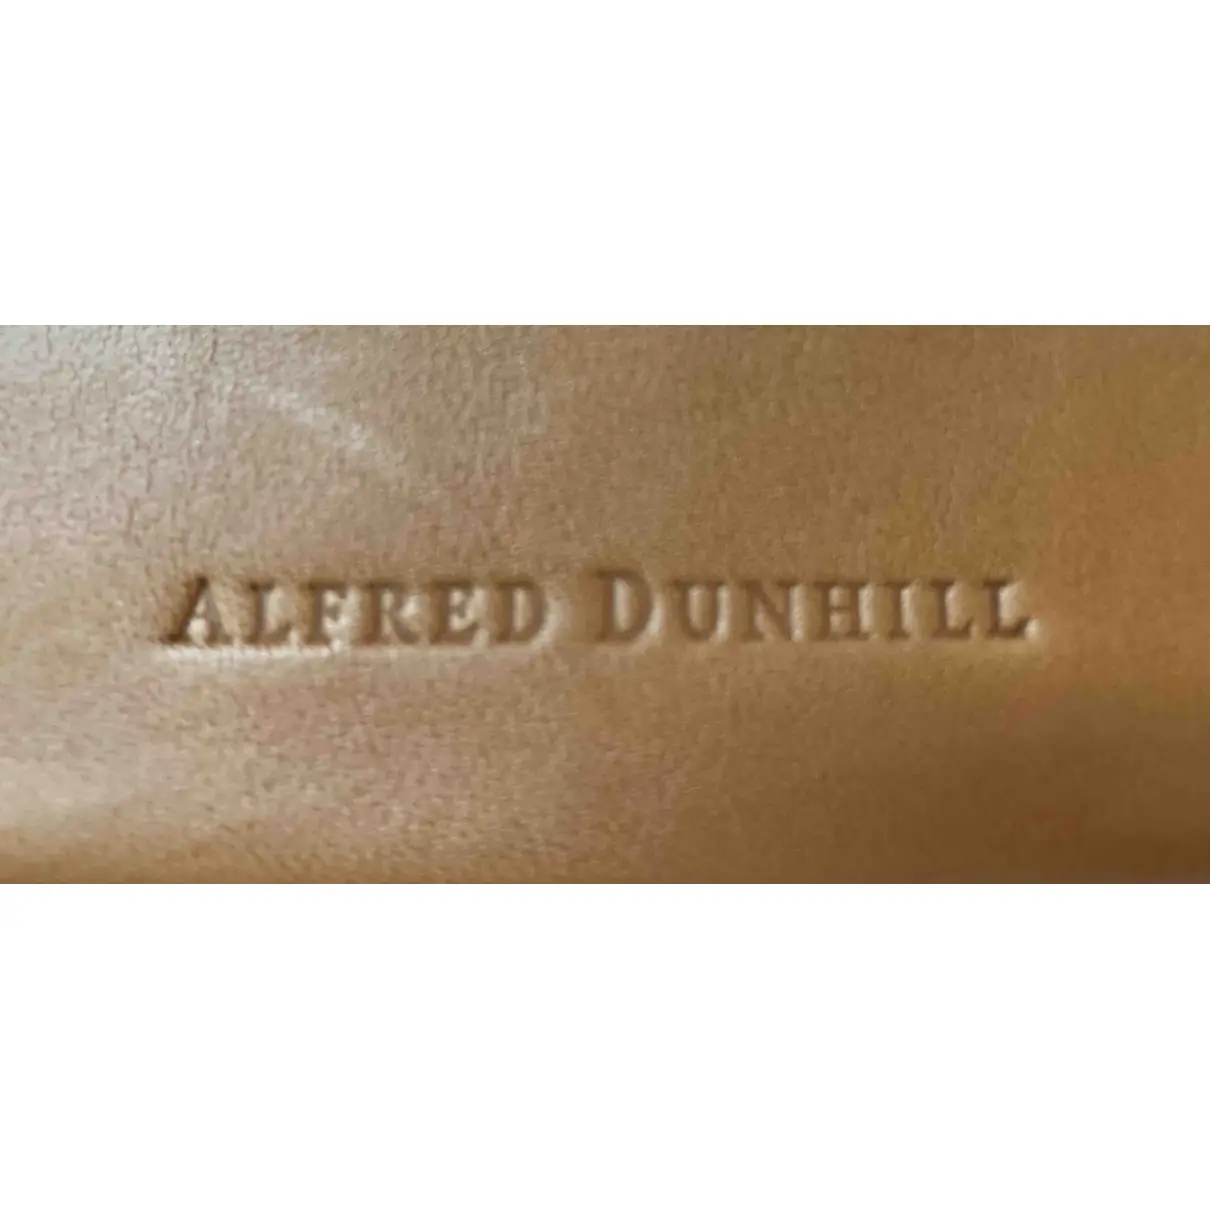 Luxury Alfred Dunhill Bags Men